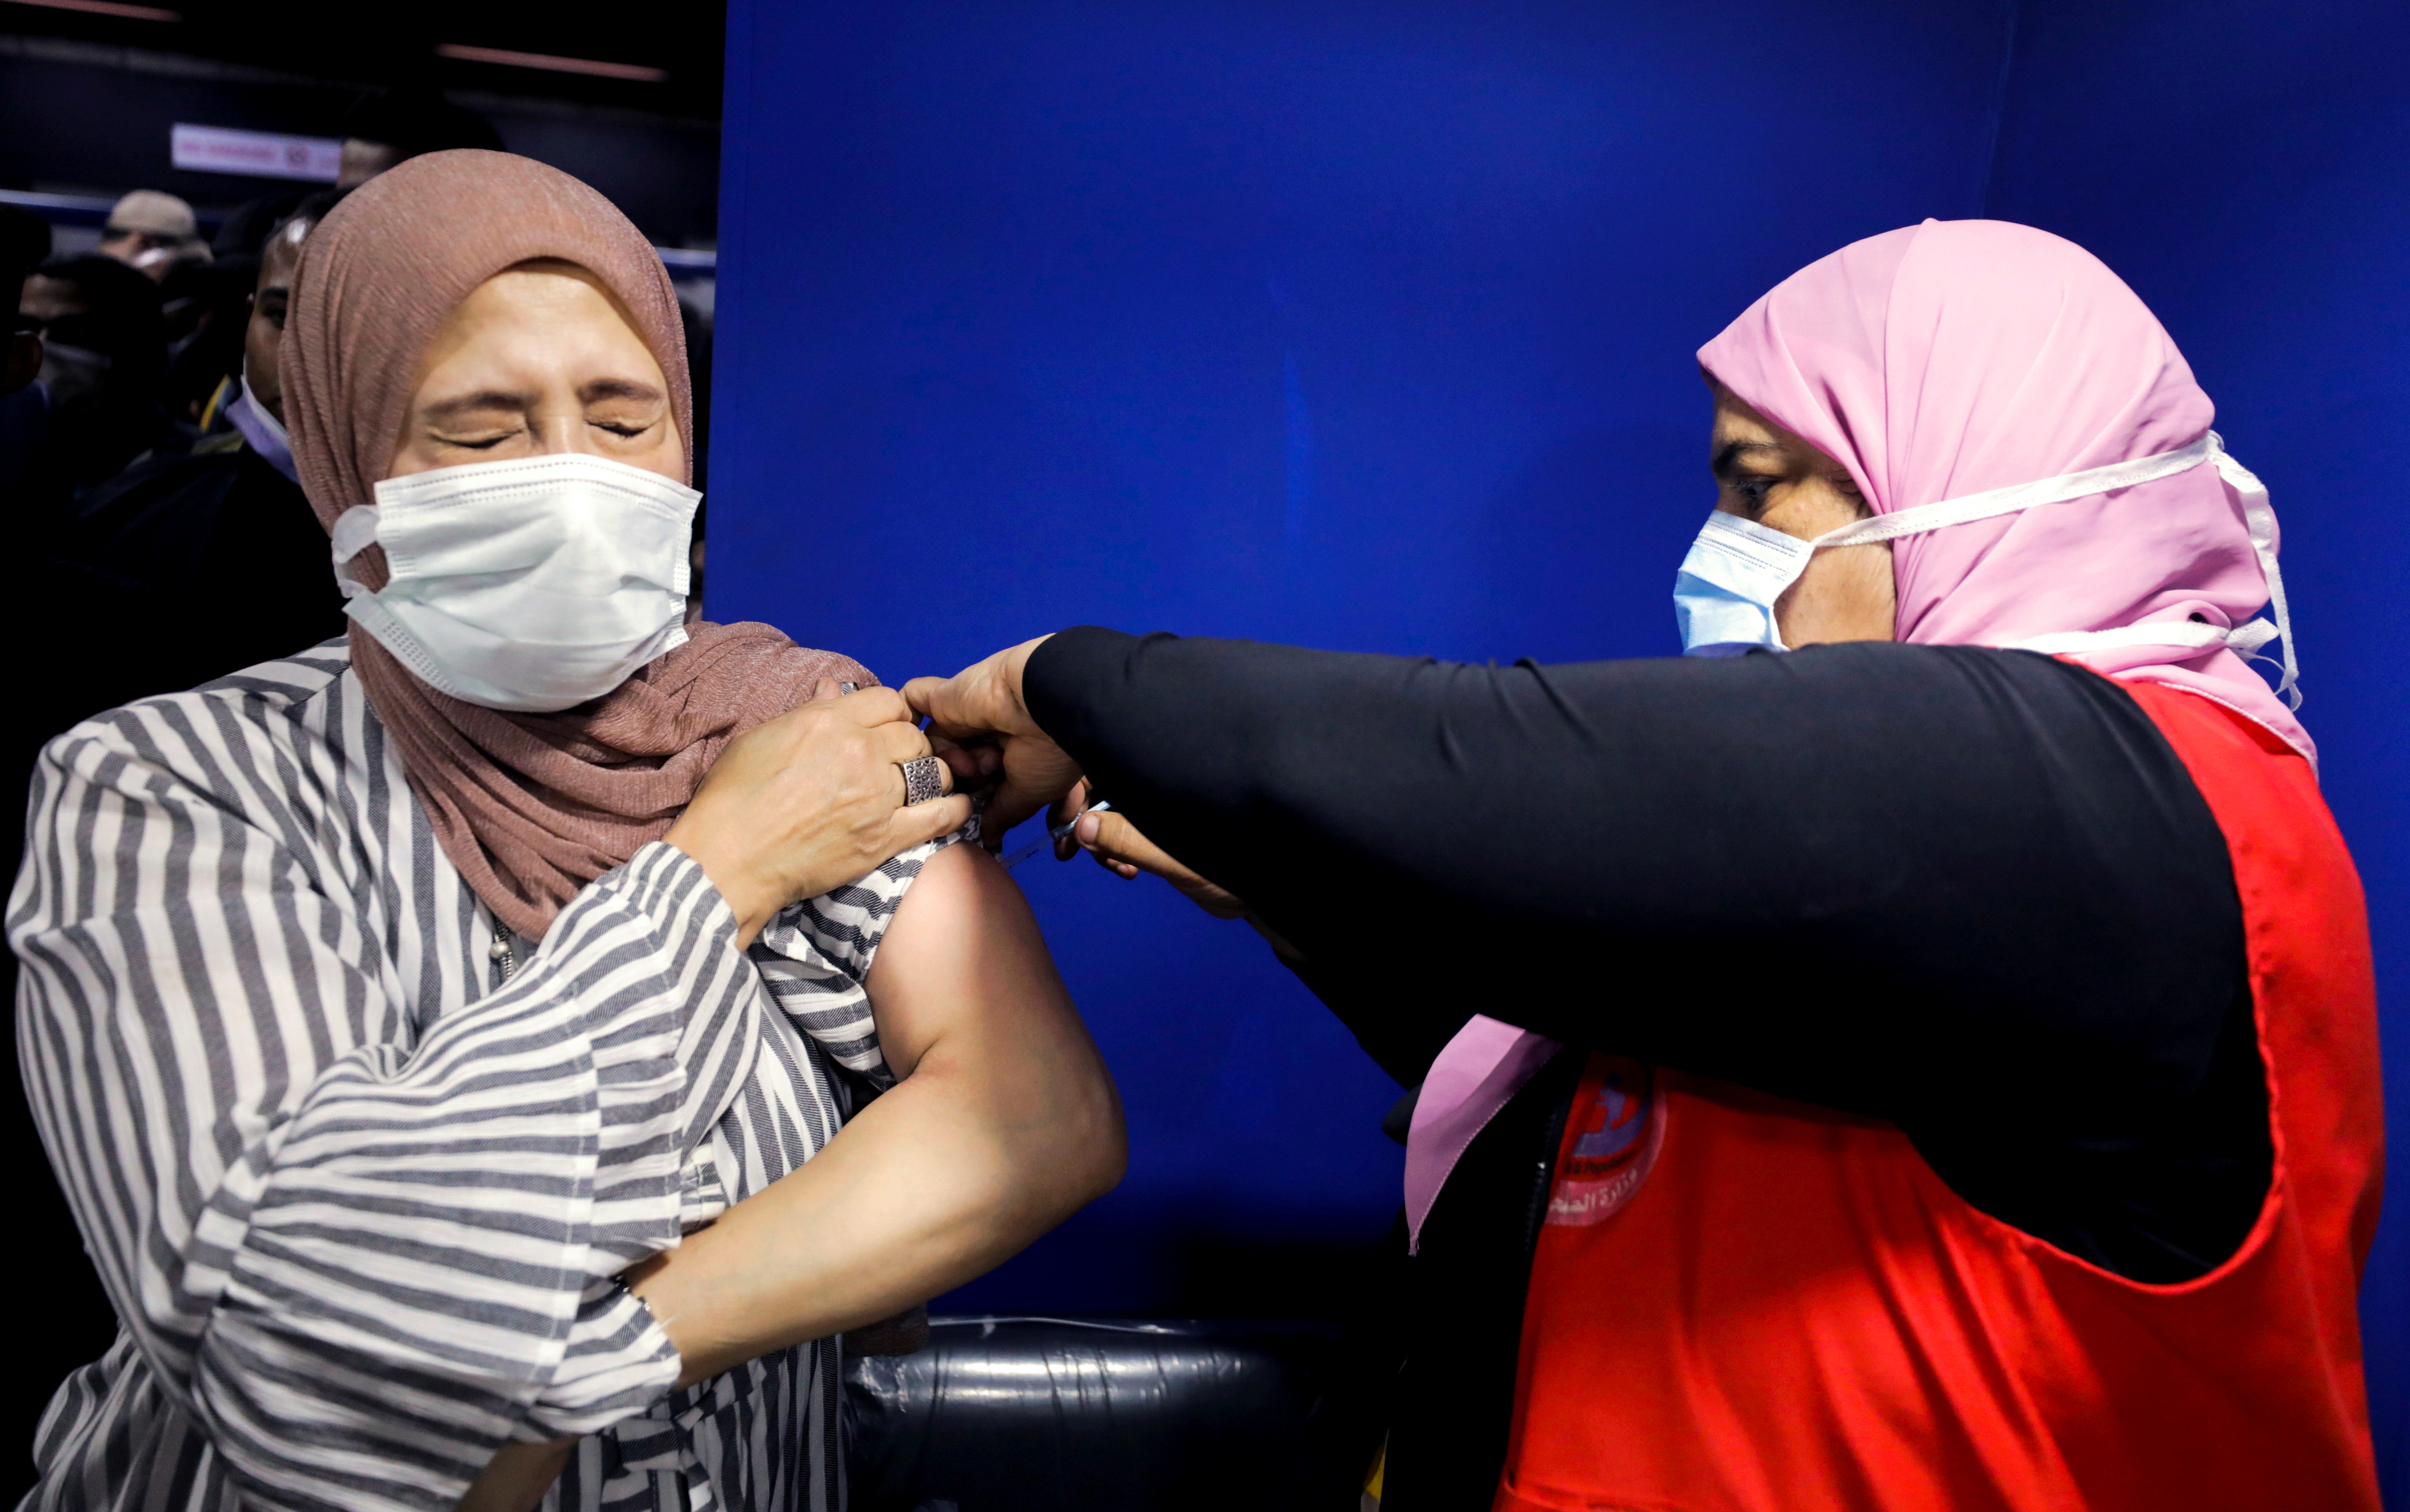 Woman receives a dose of the COVID-19 vaccine, in Cairo